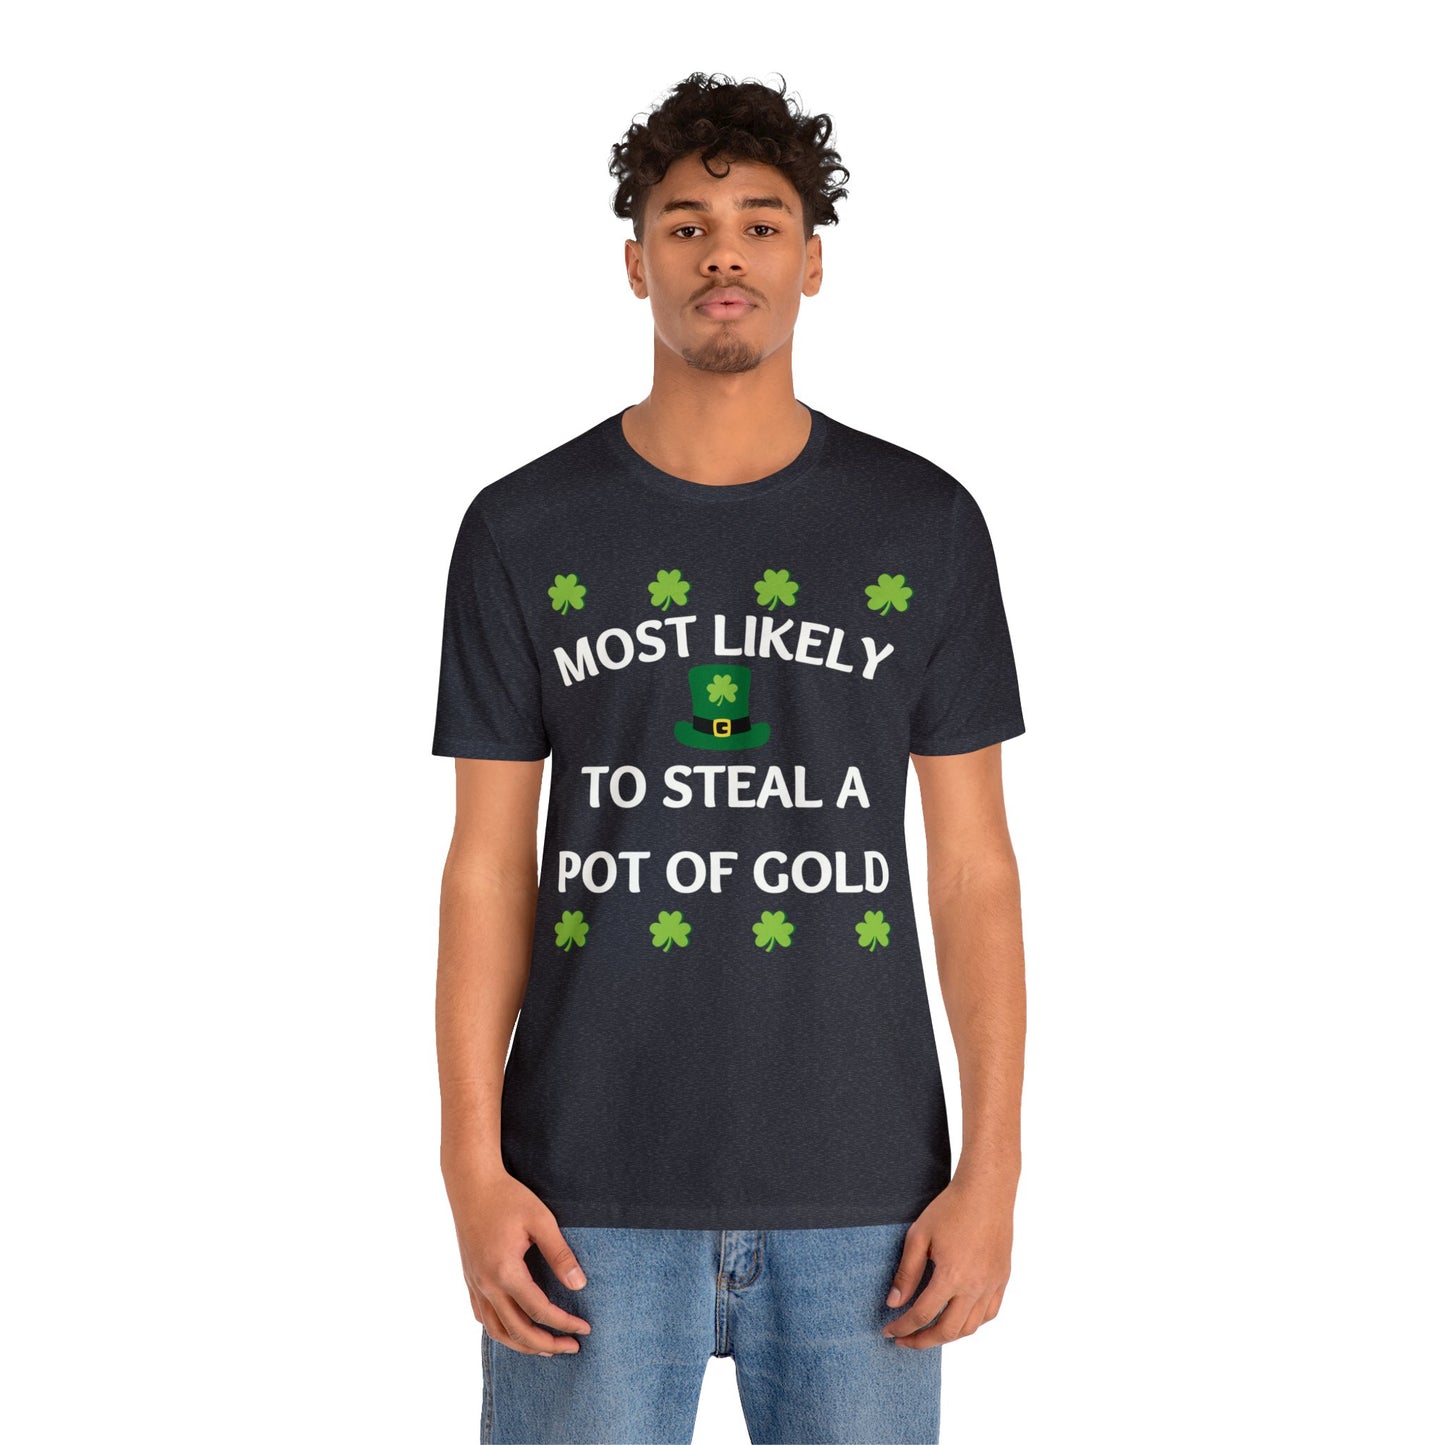 Most likely to steal a pot of gold Family Matching St Patricks Shirt